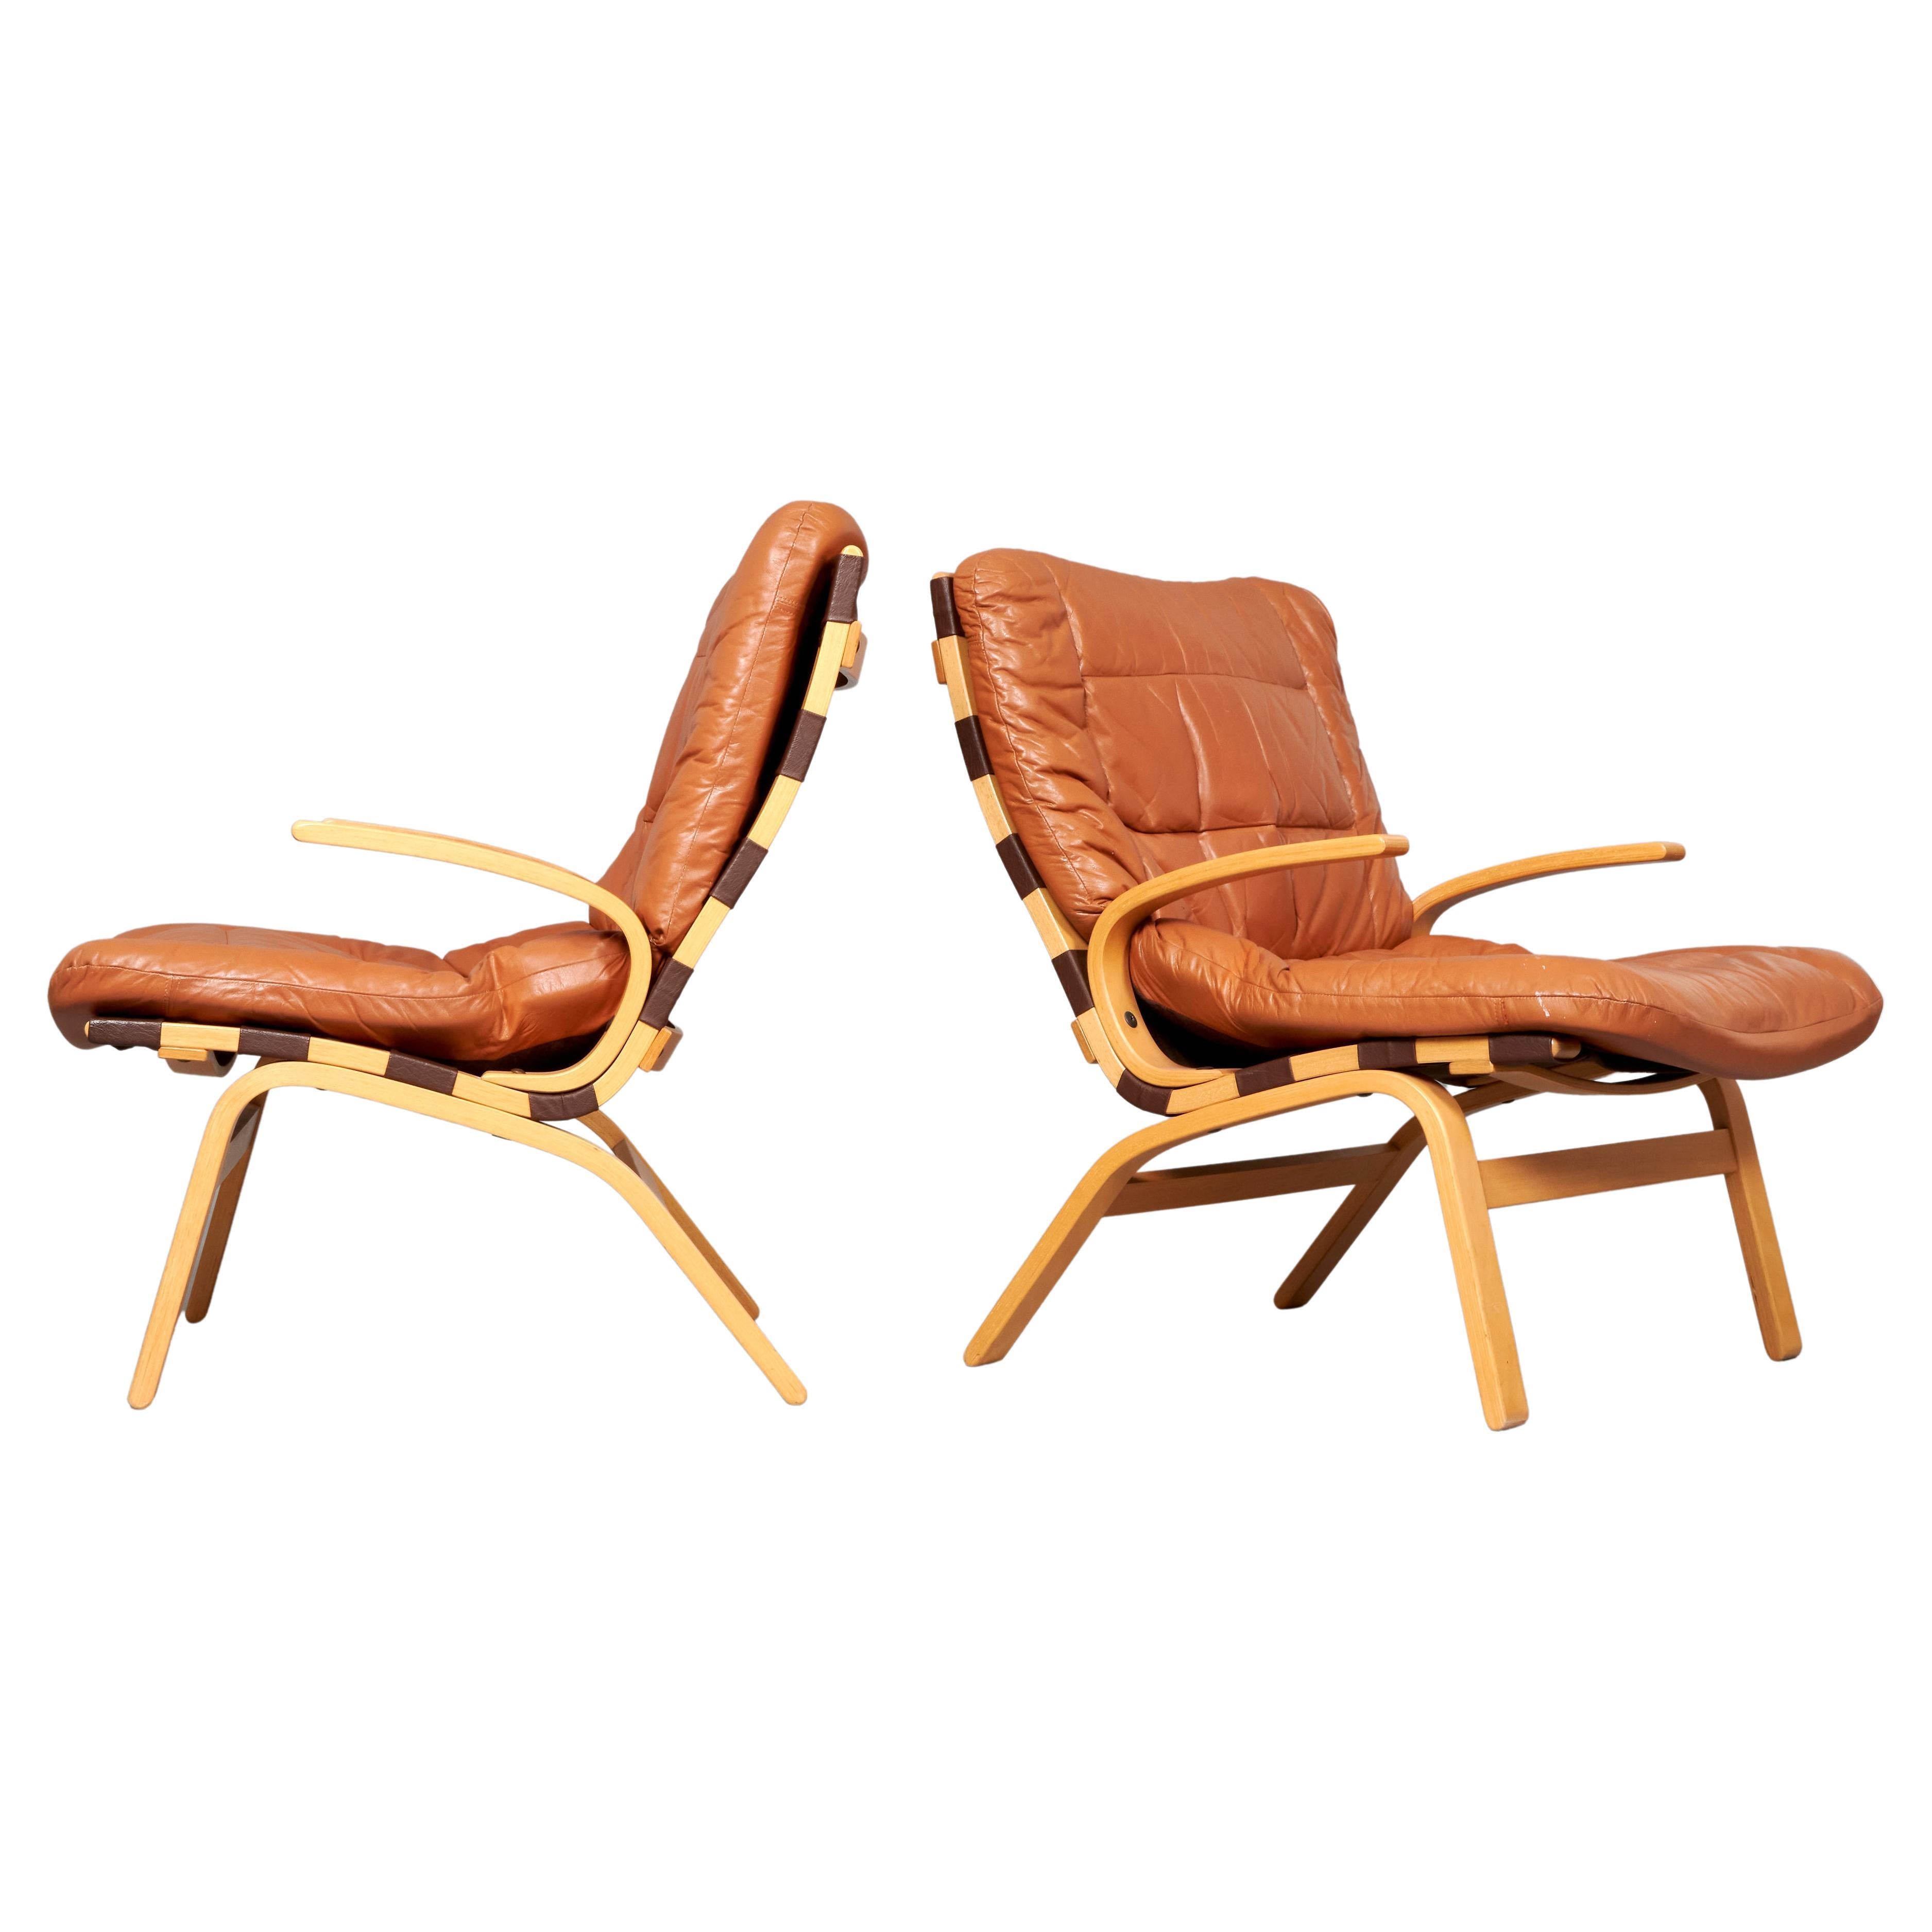 1960s Leather Armchairs from Westnofa Furniture